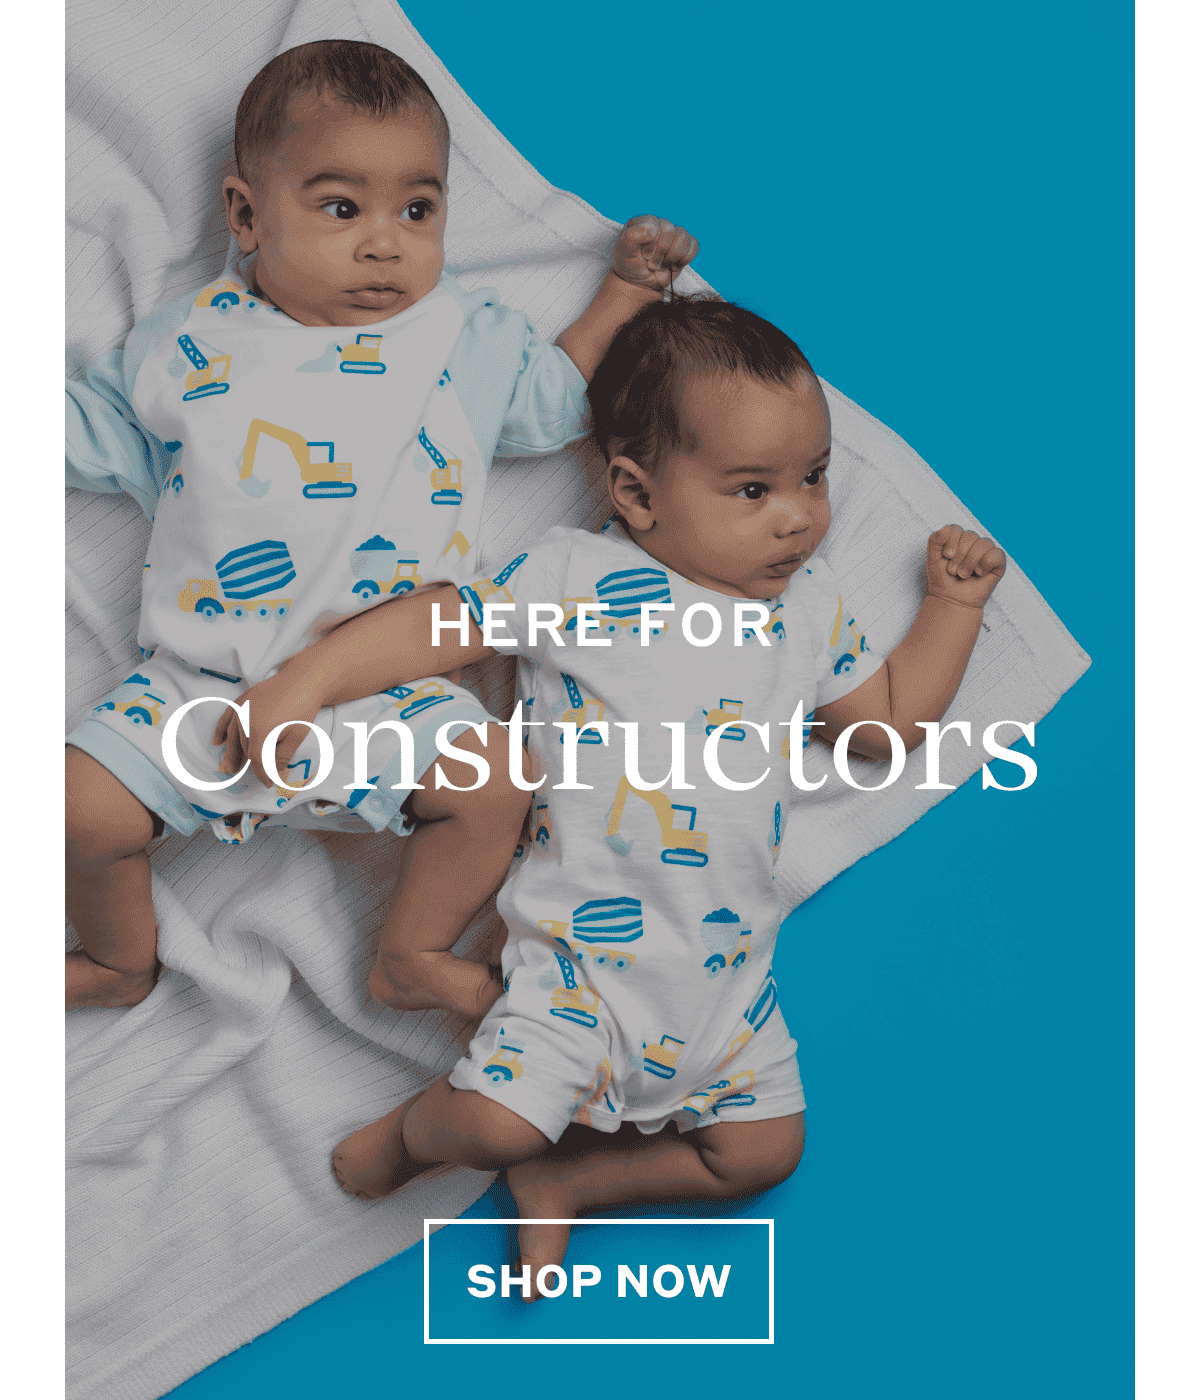 Here For Constructors - Shop Now